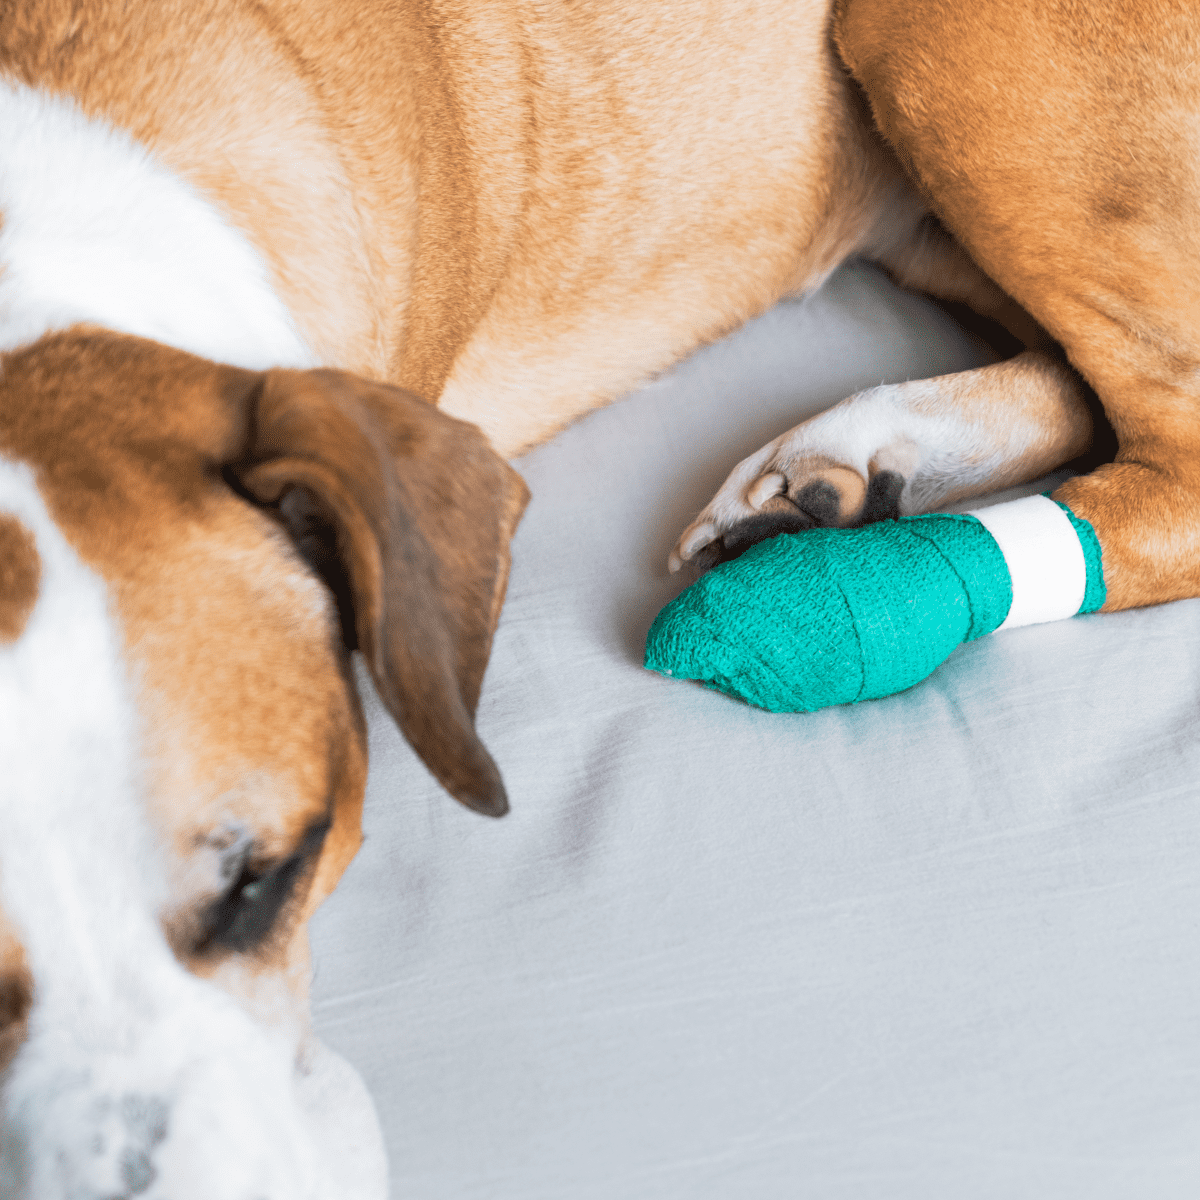 Dog Health: How to Stop a Dog From Chewing on a Wound - PetHelpful